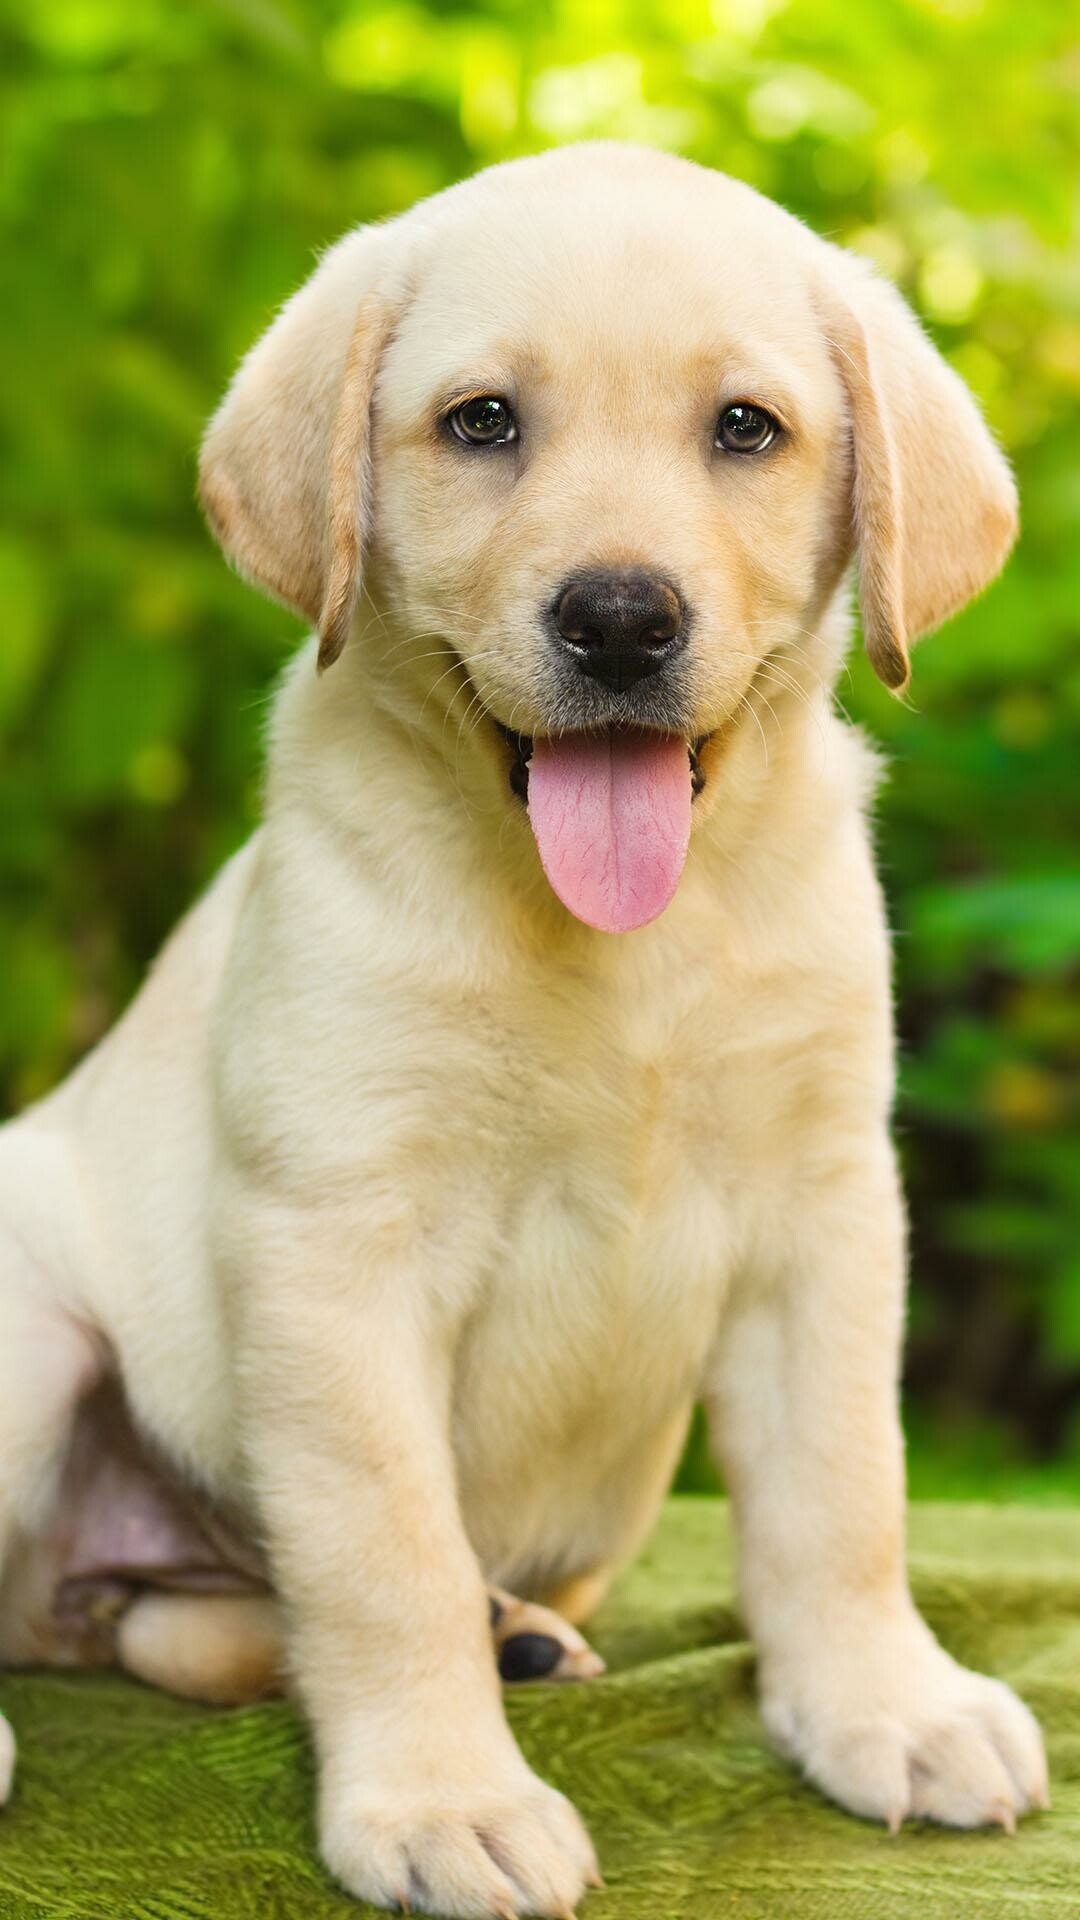 Labrador Retriever: The dog breed dates back to at the 1830s. 1080x1920 Full HD Wallpaper.